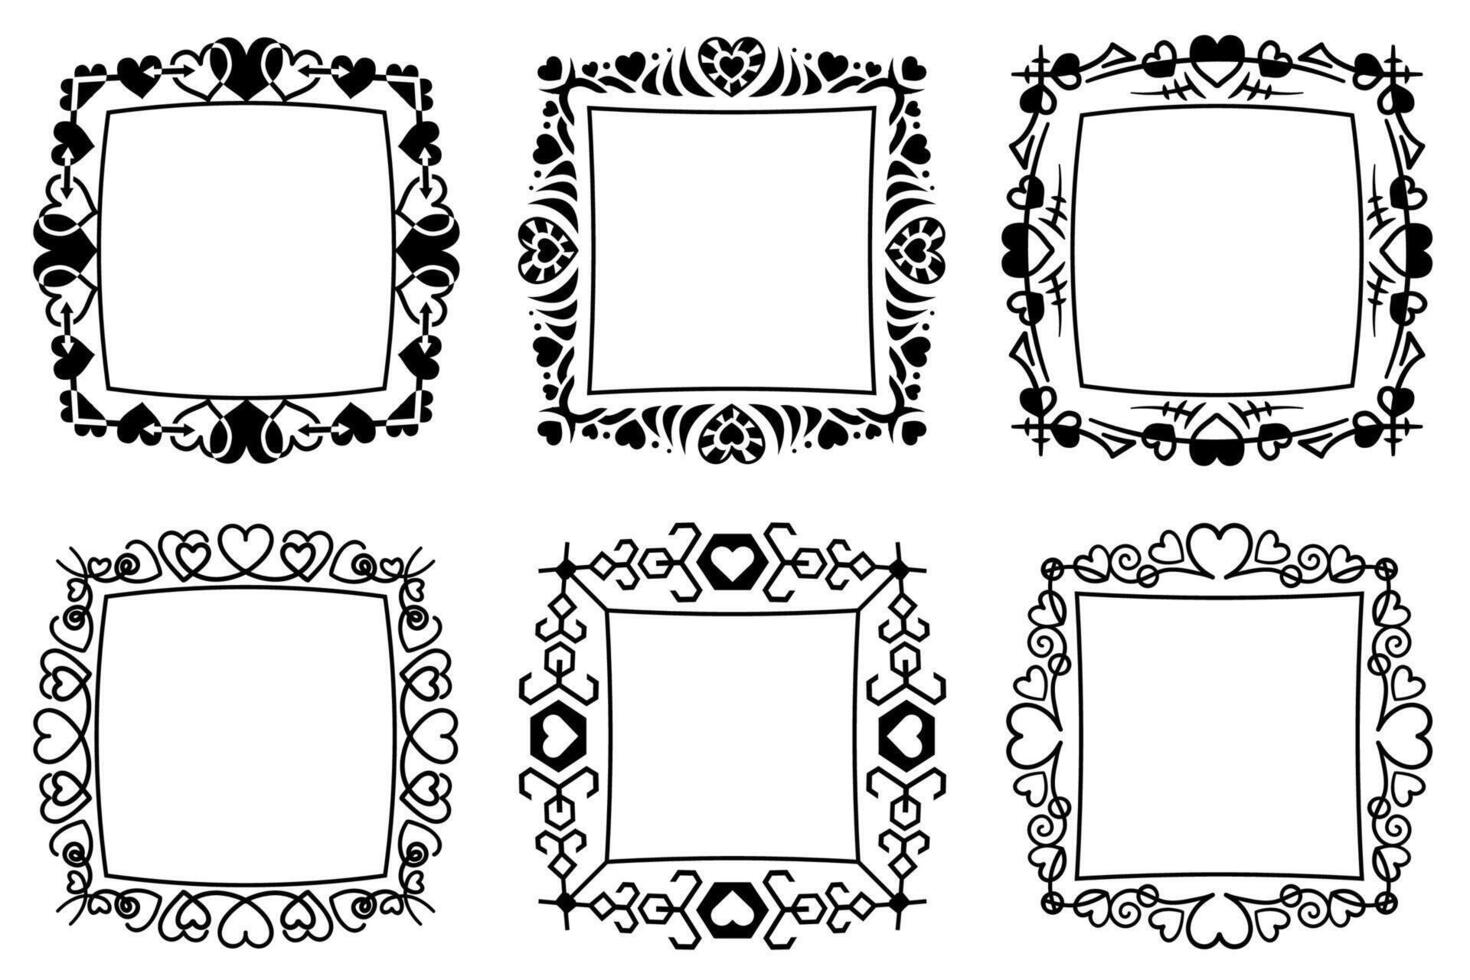 Abstract square frame with hearts. Ornamental decorative borders designs. Copy space for your text or images. vector